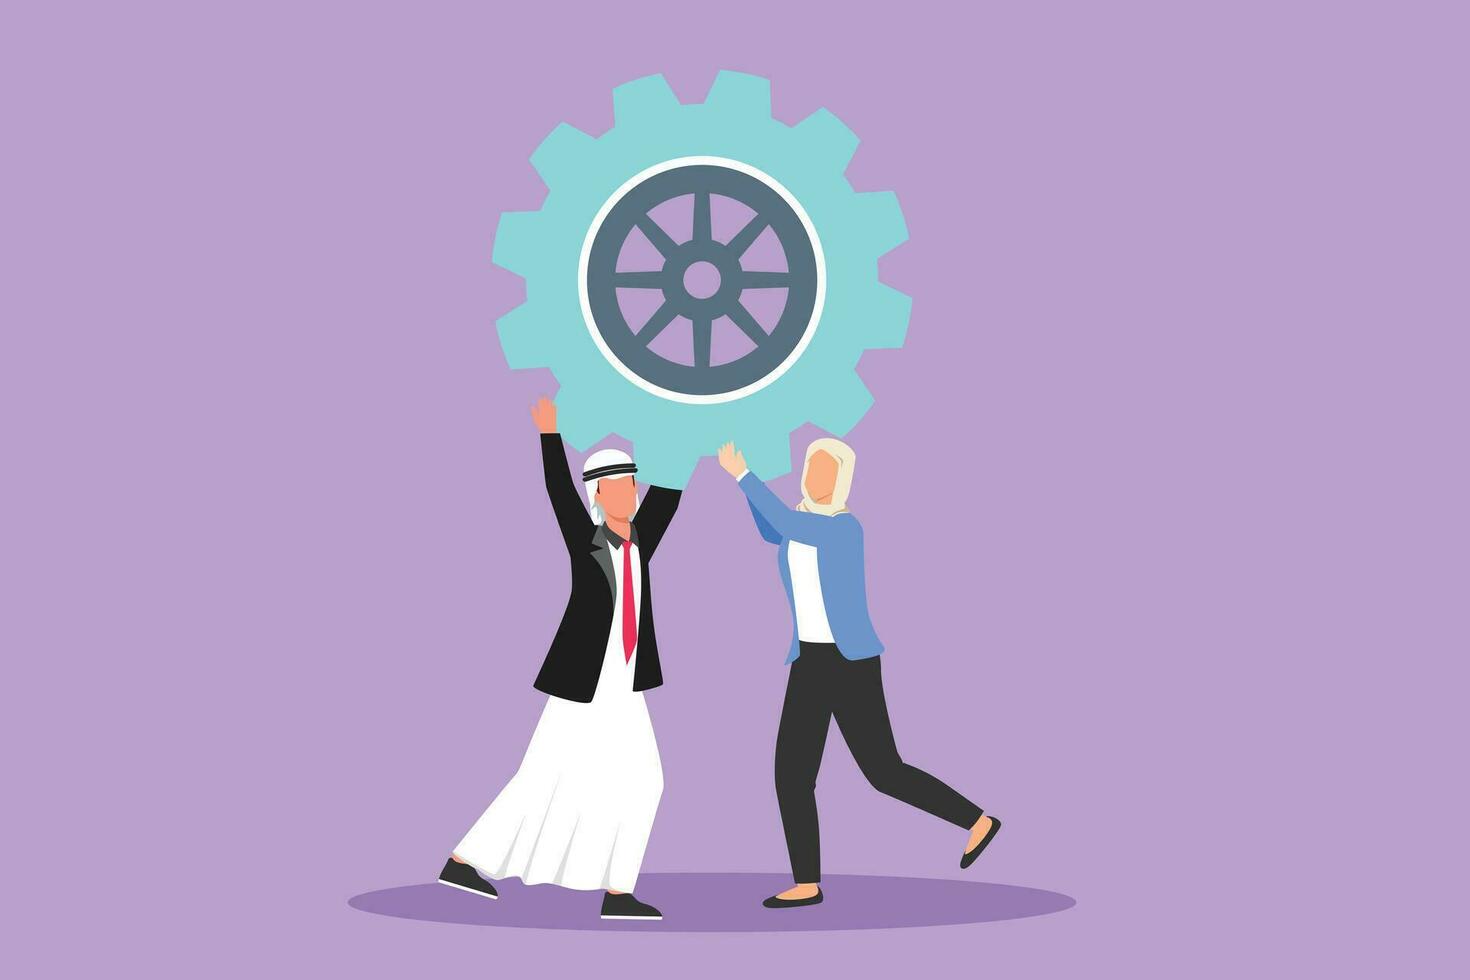 Cartoon flat style drawing collaboration project. Arabian man and woman lifting gears. People working with cogs. Professional teamwork process cooperation concept. Graphic design vector illustration